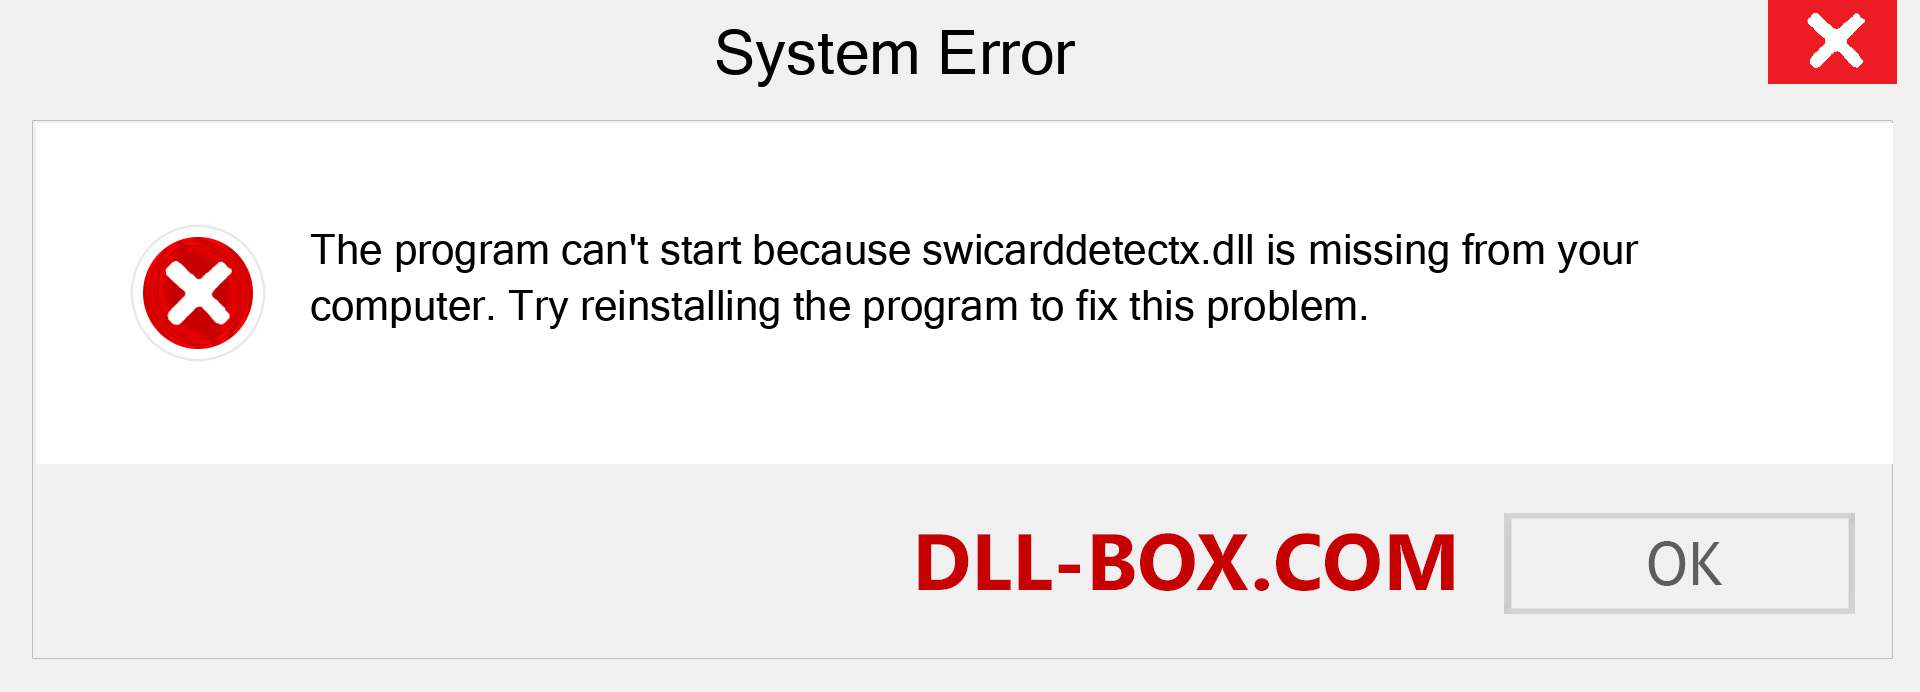  swicarddetectx.dll file is missing?. Download for Windows 7, 8, 10 - Fix  swicarddetectx dll Missing Error on Windows, photos, images